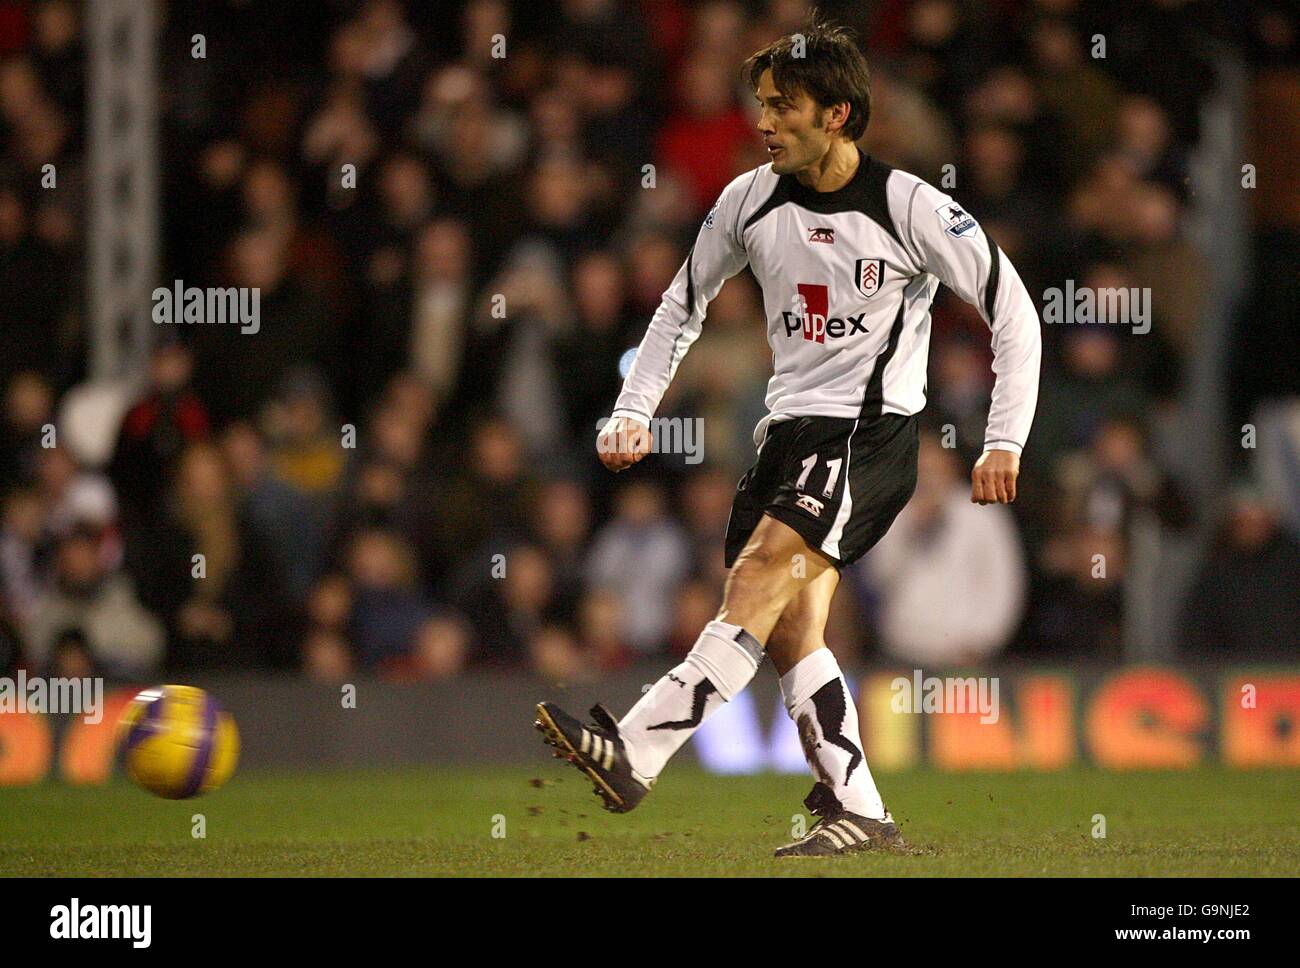 Soccer - FA Barclays Premiership - Fulham v Tottenham Hotspur - Craven Cottage. Fulham's Vincenzo Montella scores the opening goal of the game Stock Photo